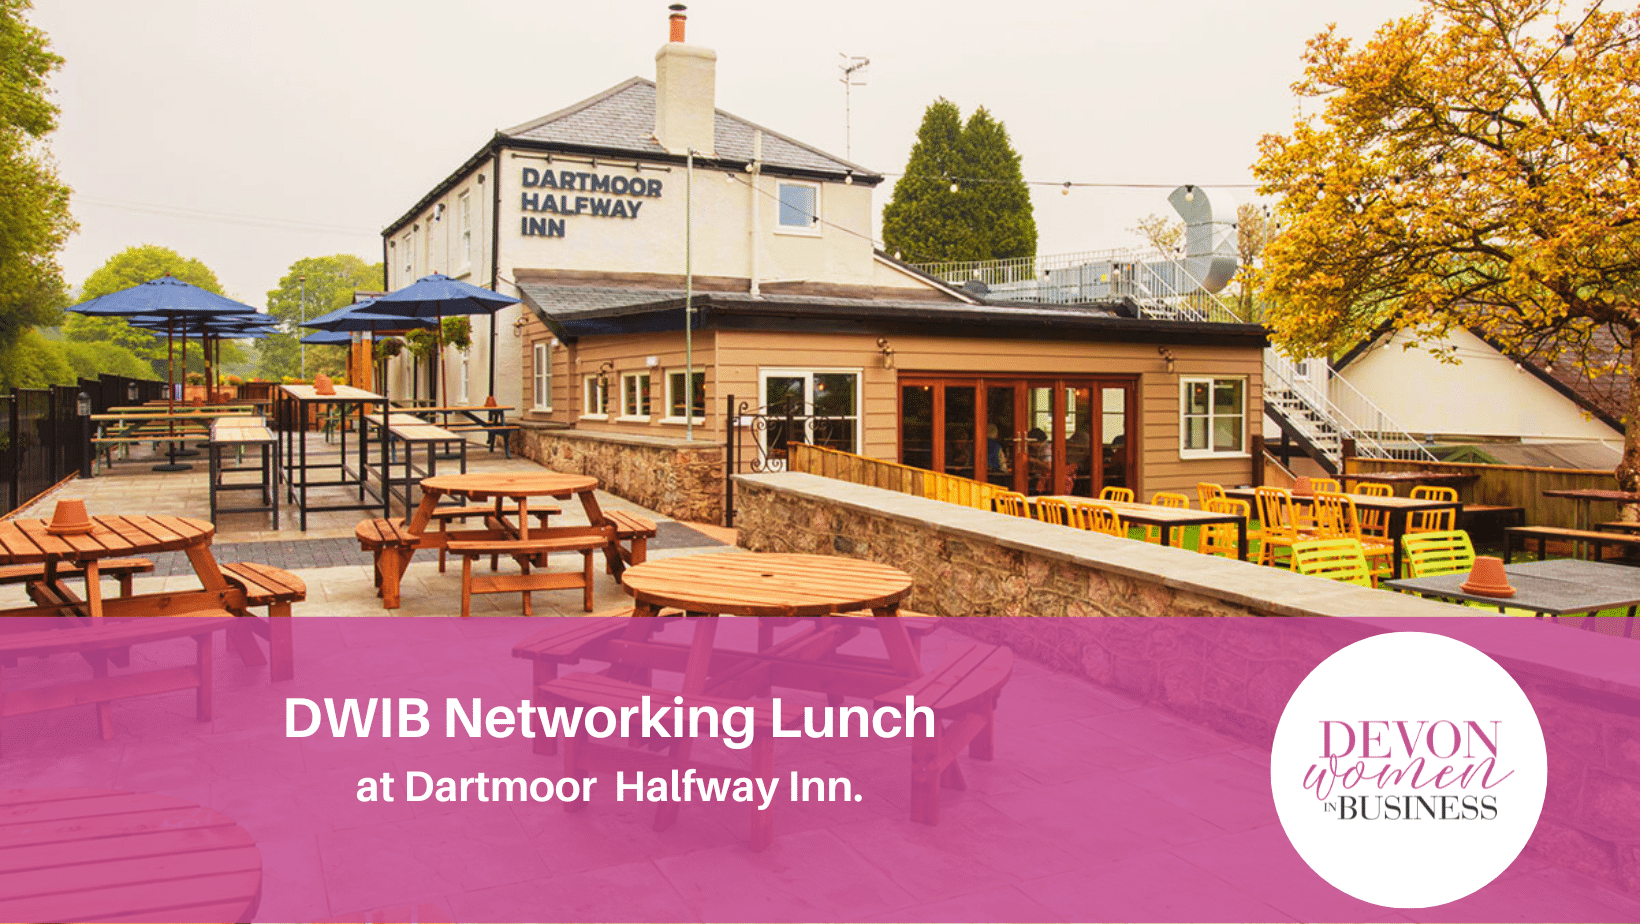 DWIB Networking Lunch at the Dartmoor Halfway Inn